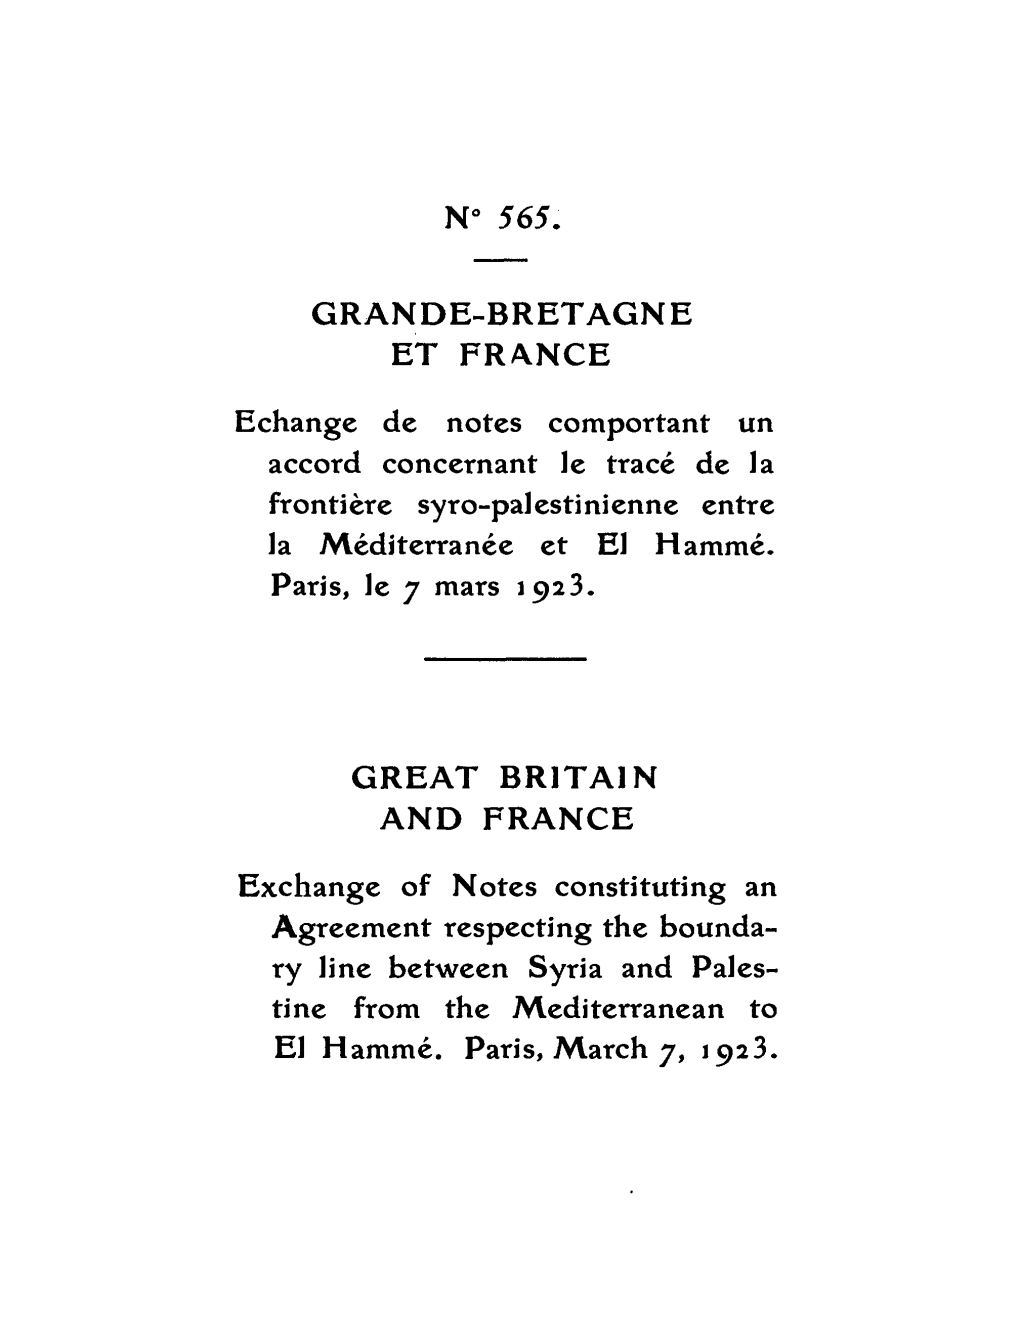 Great Britain and France